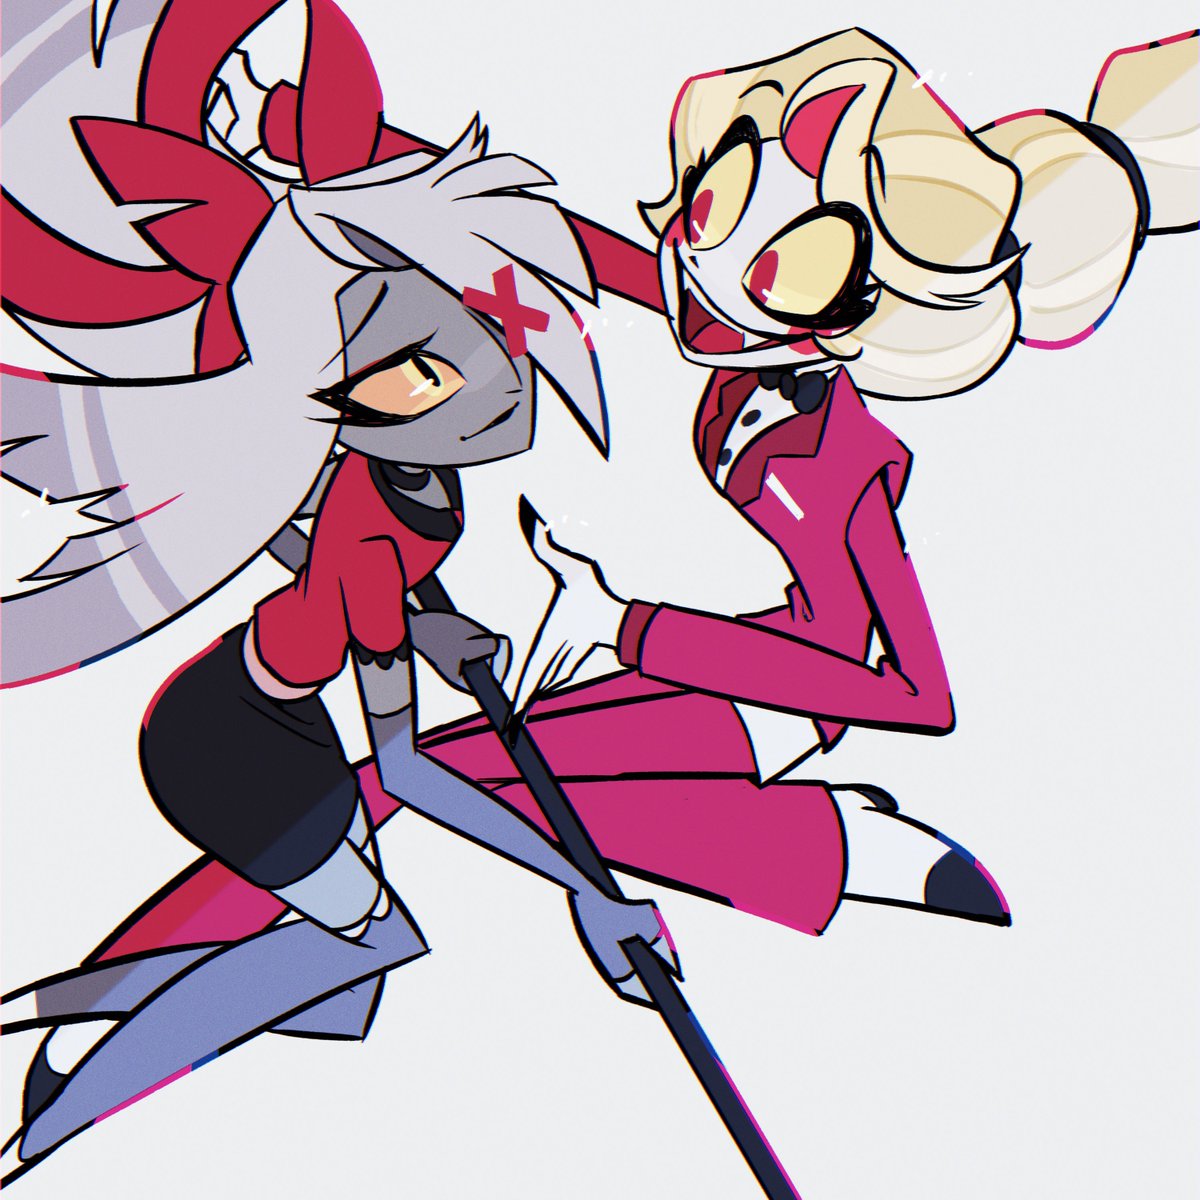 「Can't wait to check in!    #HazbinHotelC」|笠子❤️‍🔥原稿のイラスト